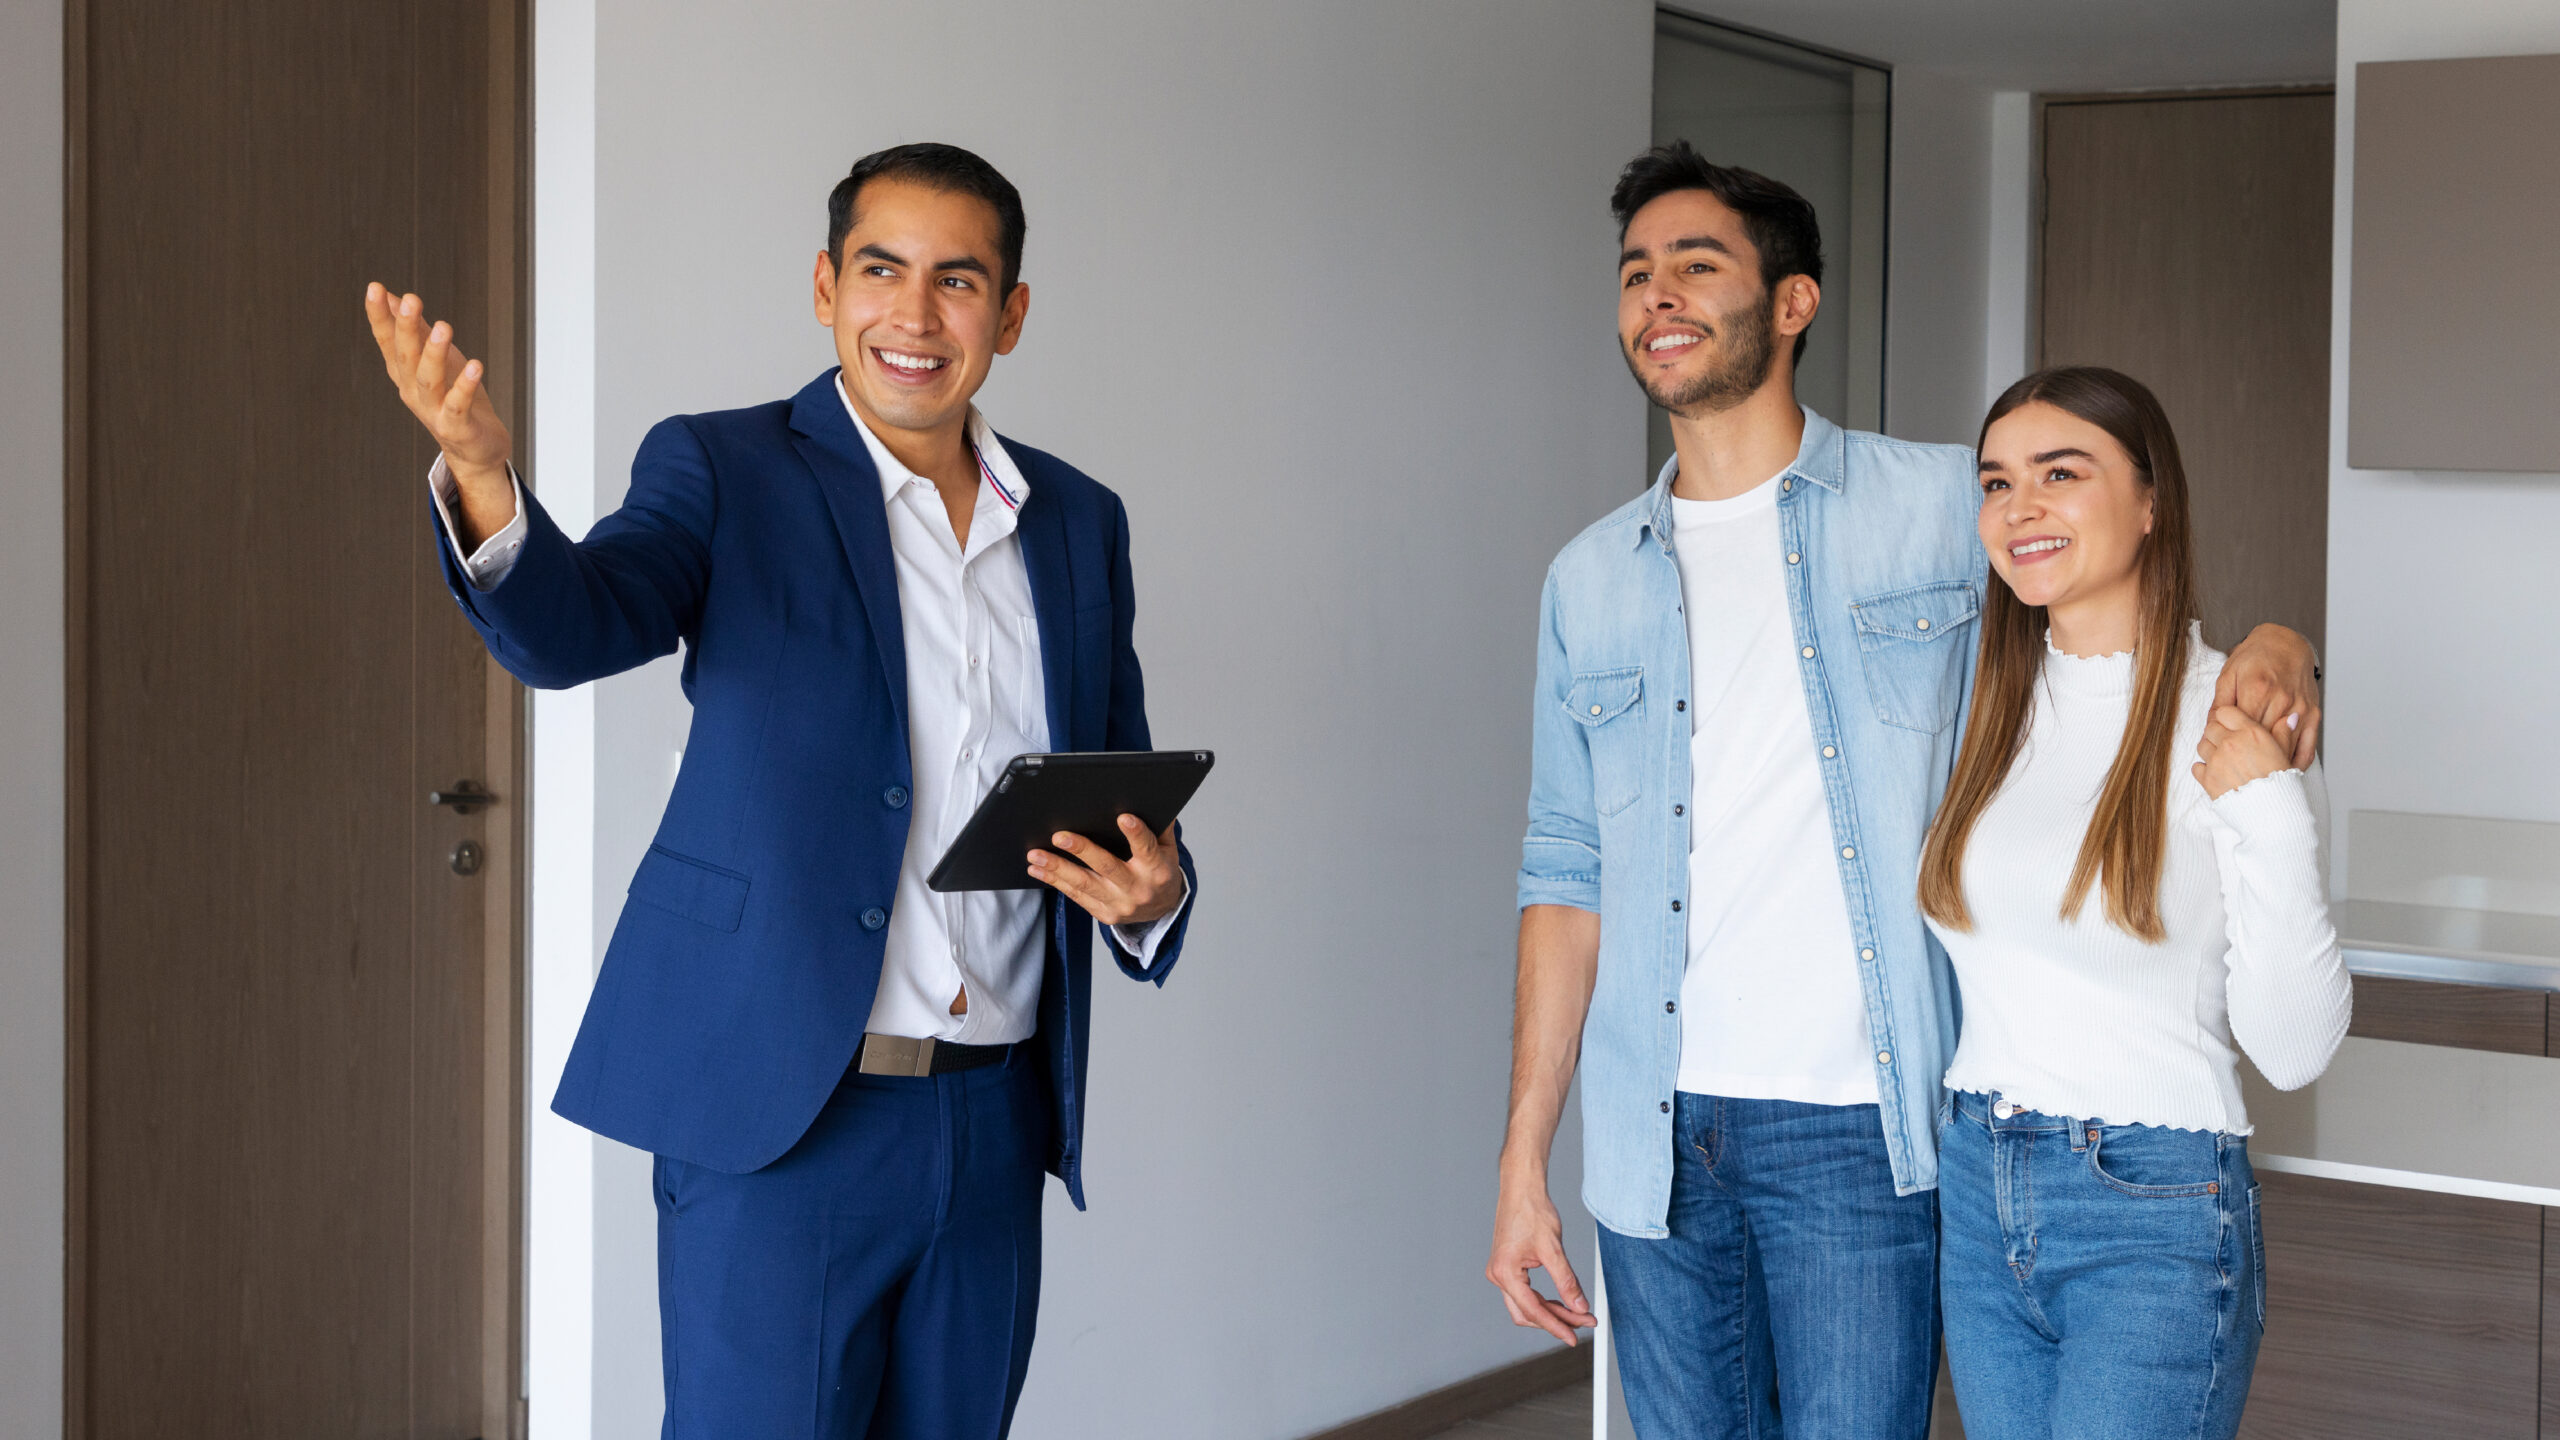 Benefits of Using Real Estate Agents for Home Buyers